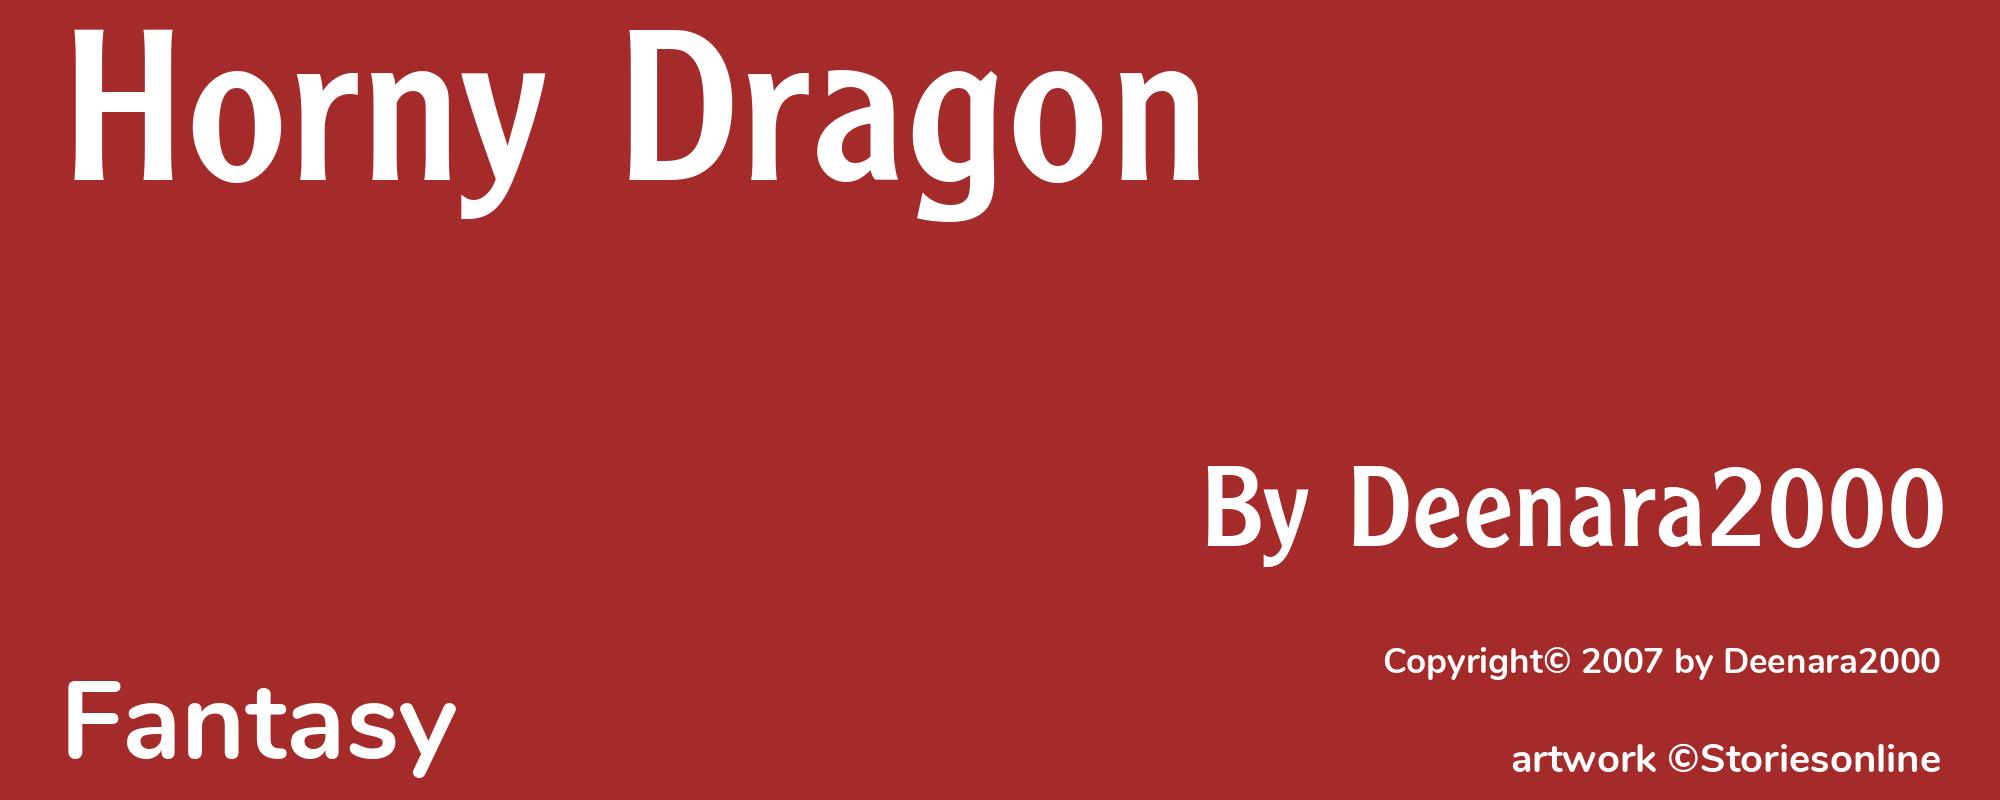 Horny Dragon - Cover